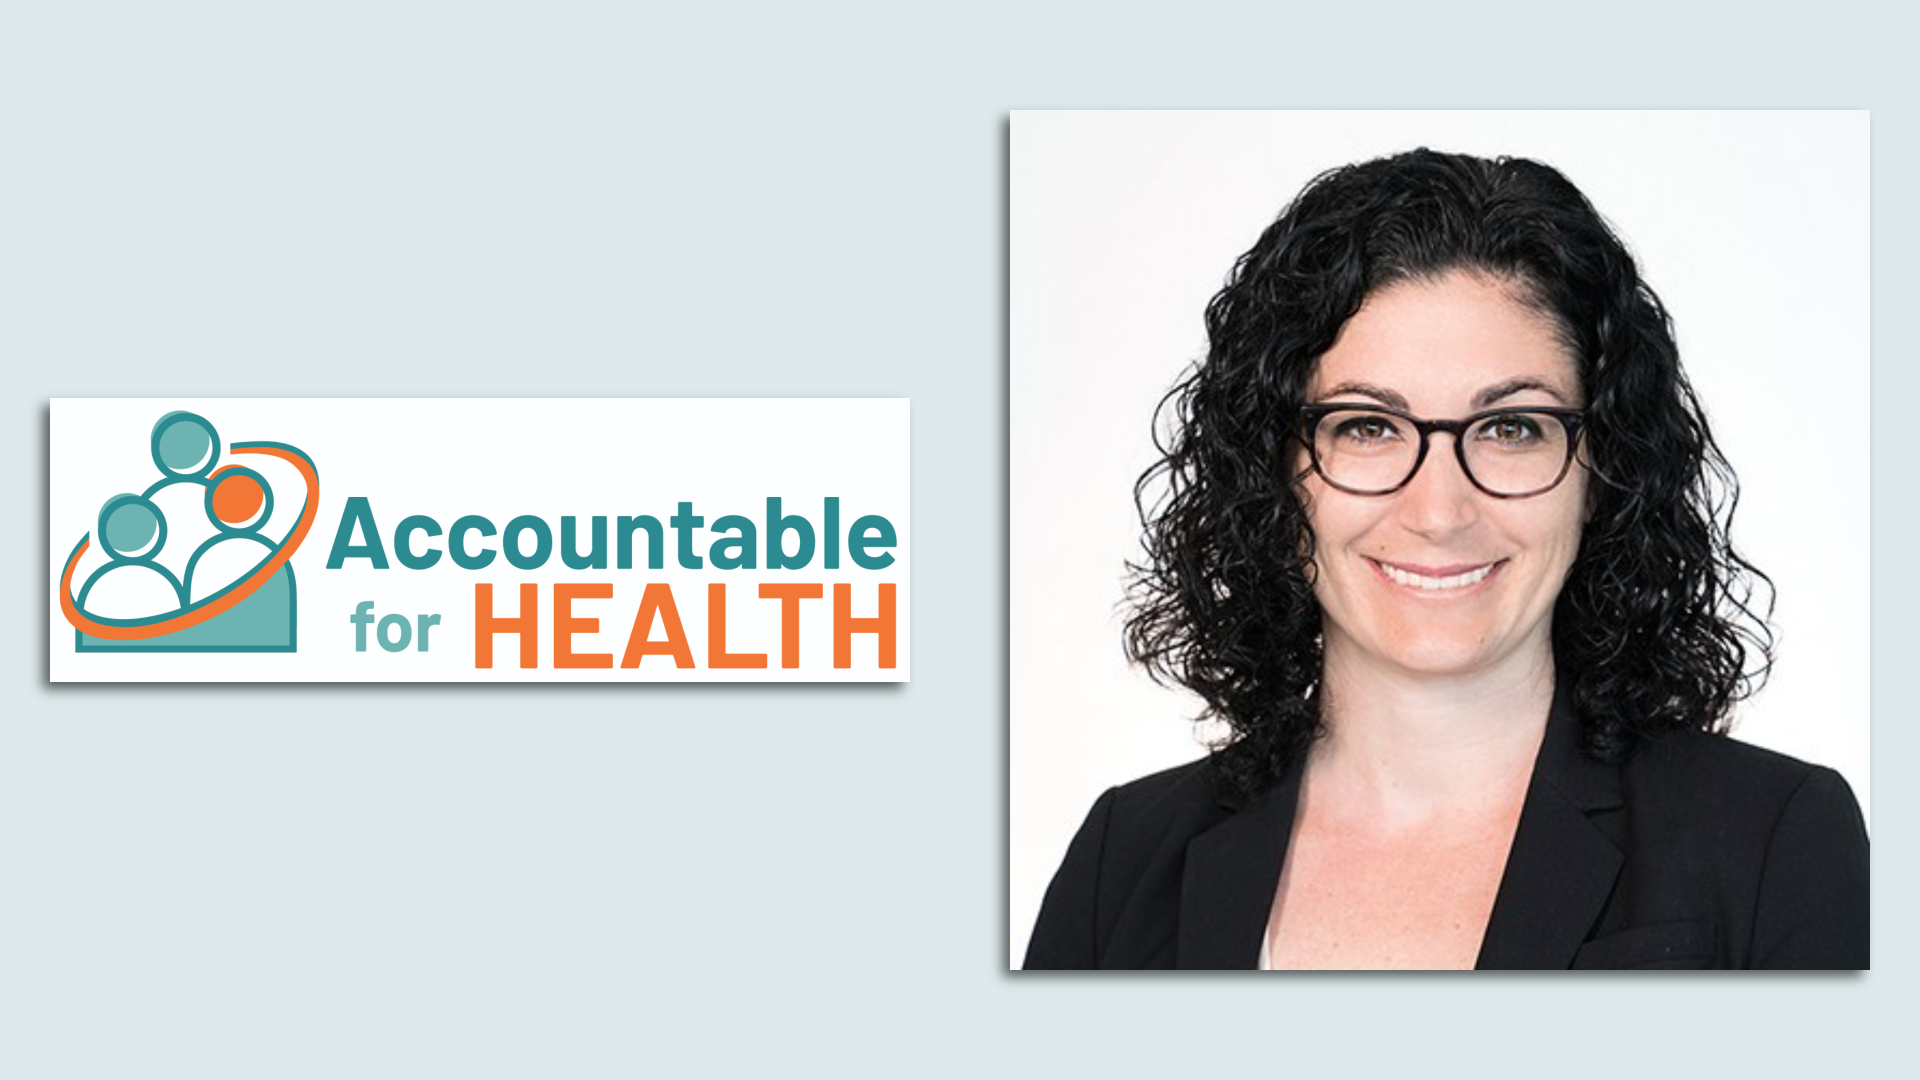 Left: logo for Accountable for Health, which includes a drawing of three people with a circle around them. Right: Headshot of Mara McDermott, a white woman with dark curly hair and glasses